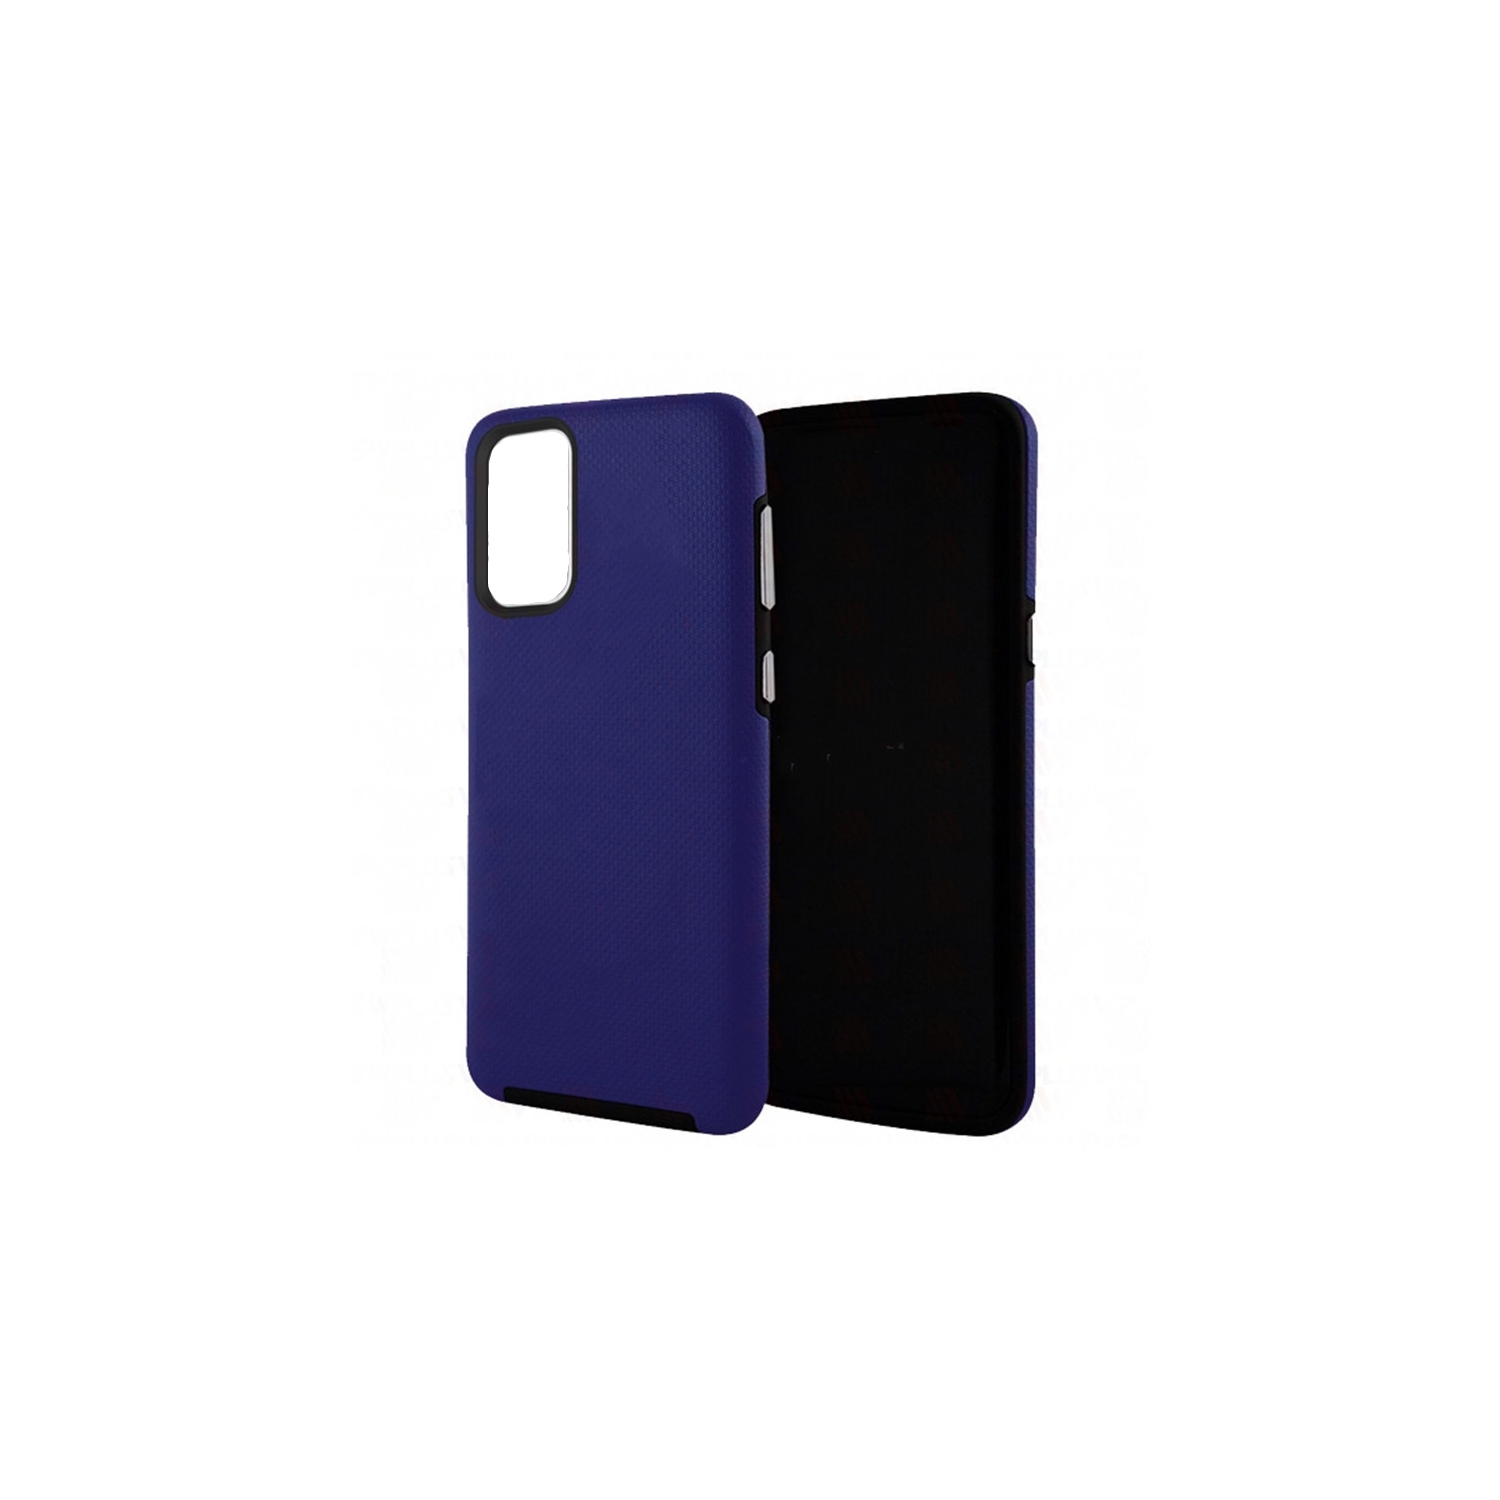 【CSmart】 Slim Fitted Hybrid Hard PC Shell Shockproof Scratch Resistant Case Cover for Samsung Galaxy A32 5G, Navy